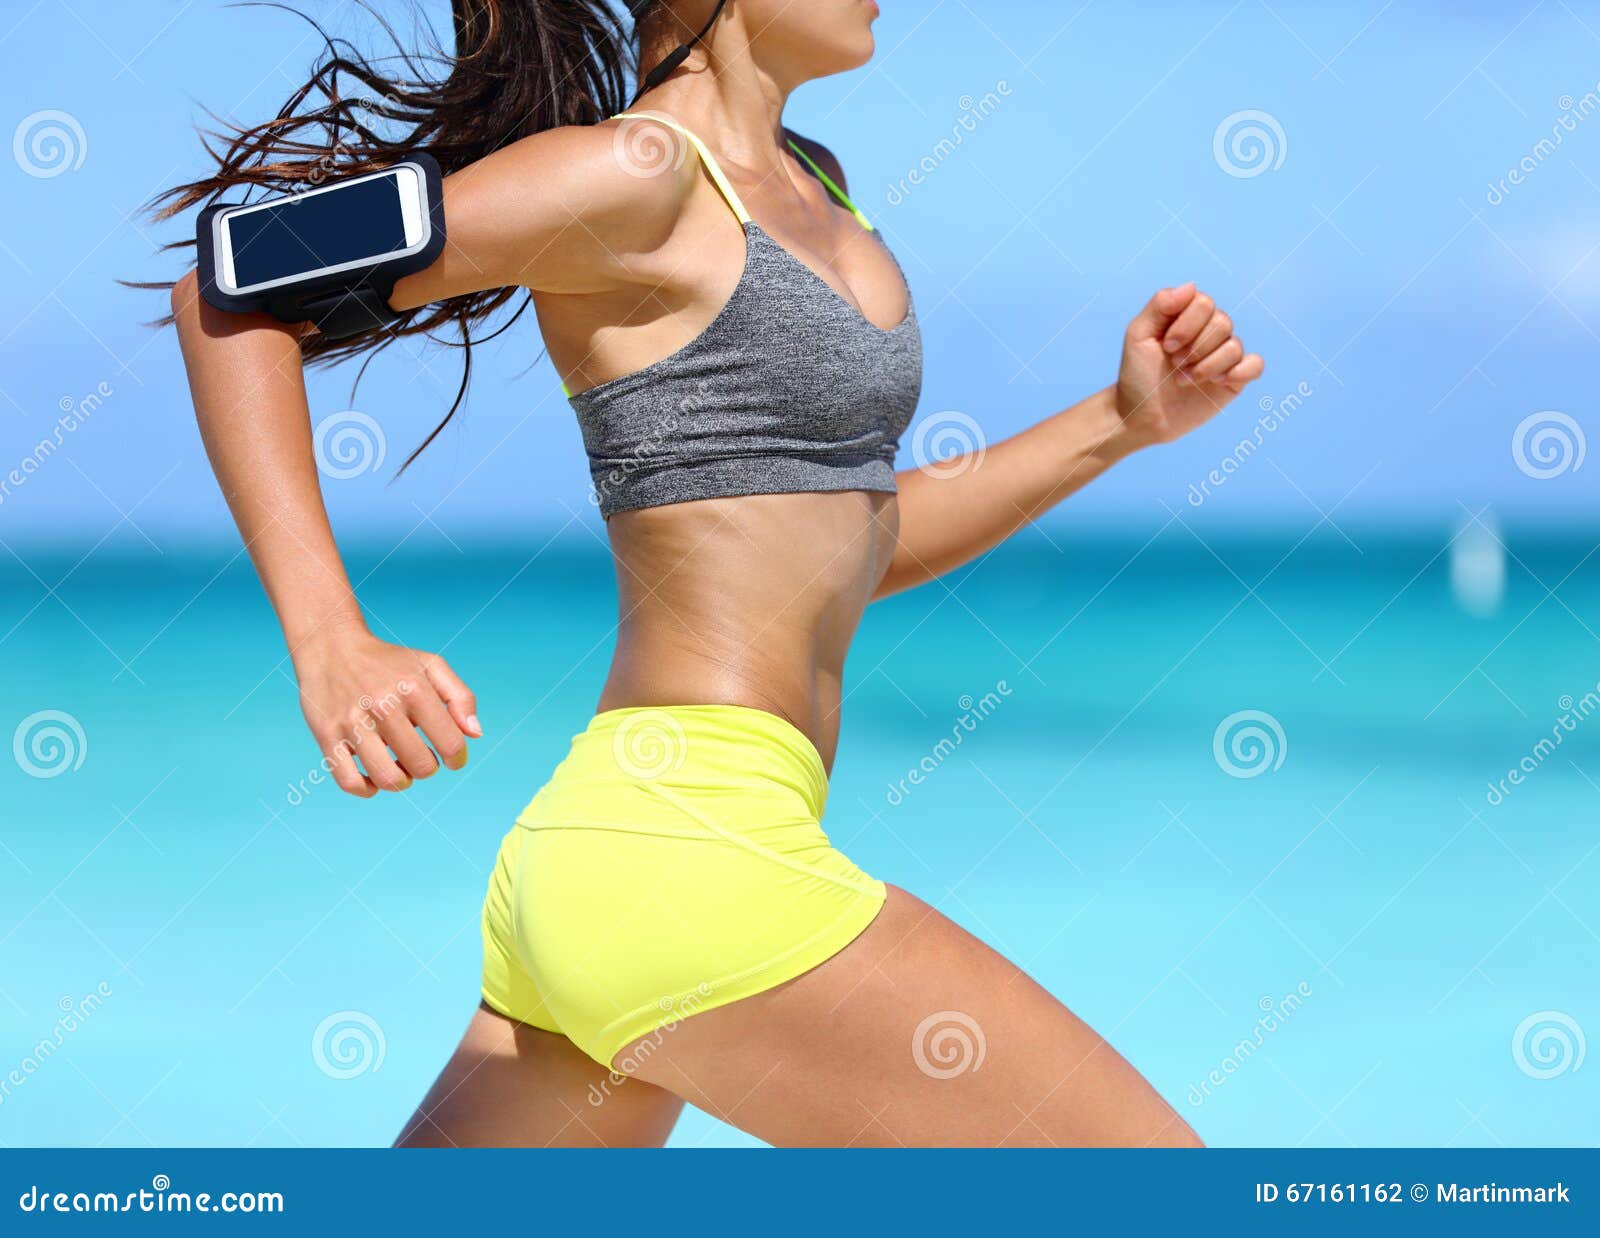 Female runner on beach with sports bra and shorts. Midsection closeup of  body of a woman athlete running with speed fast training cardio wearing  neon yellow activewear outfit. Active lifestyle. Photos